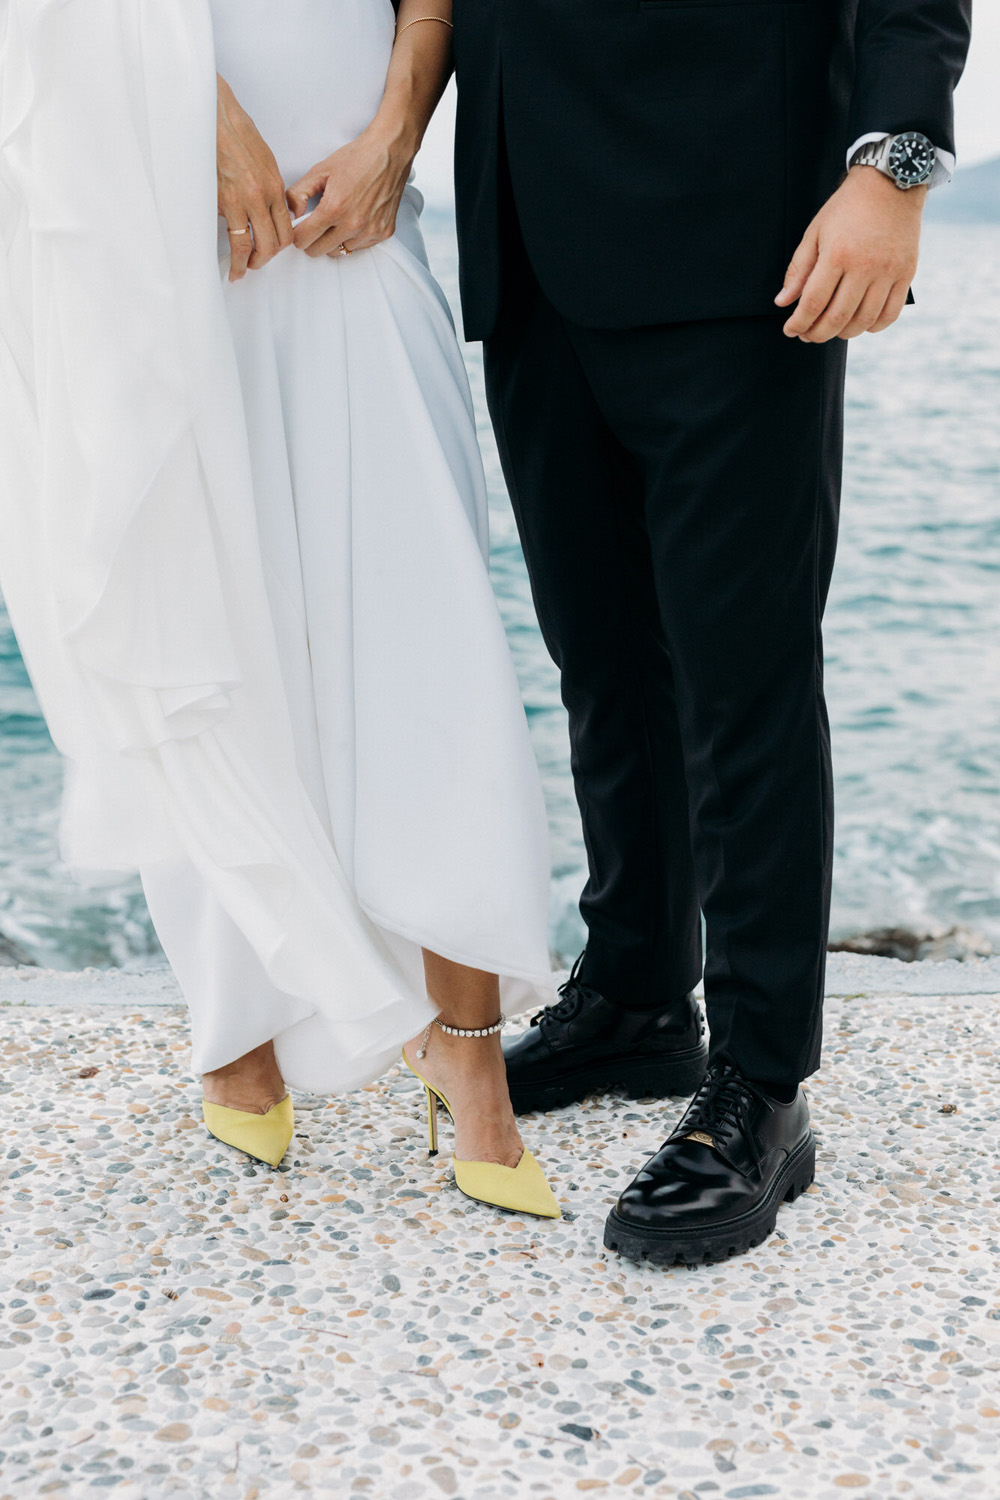 Bride wearing lime green shoes